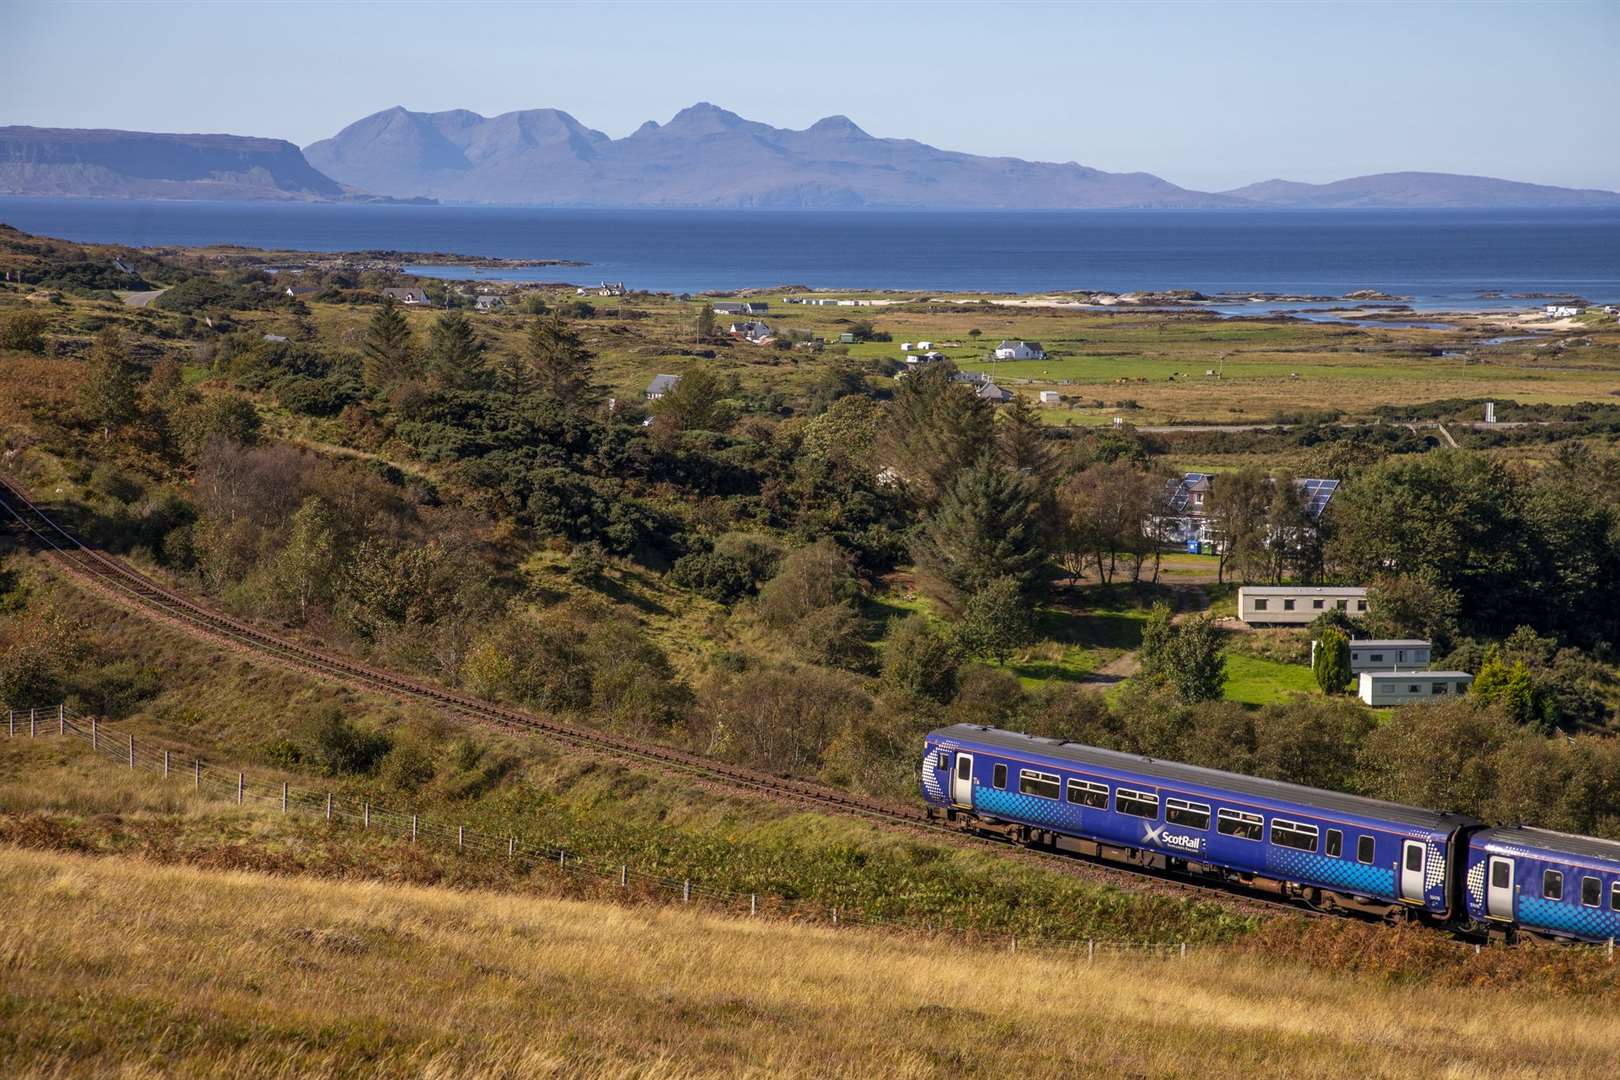 ScotRail-train after departing Arisaig on the West Highland Line.